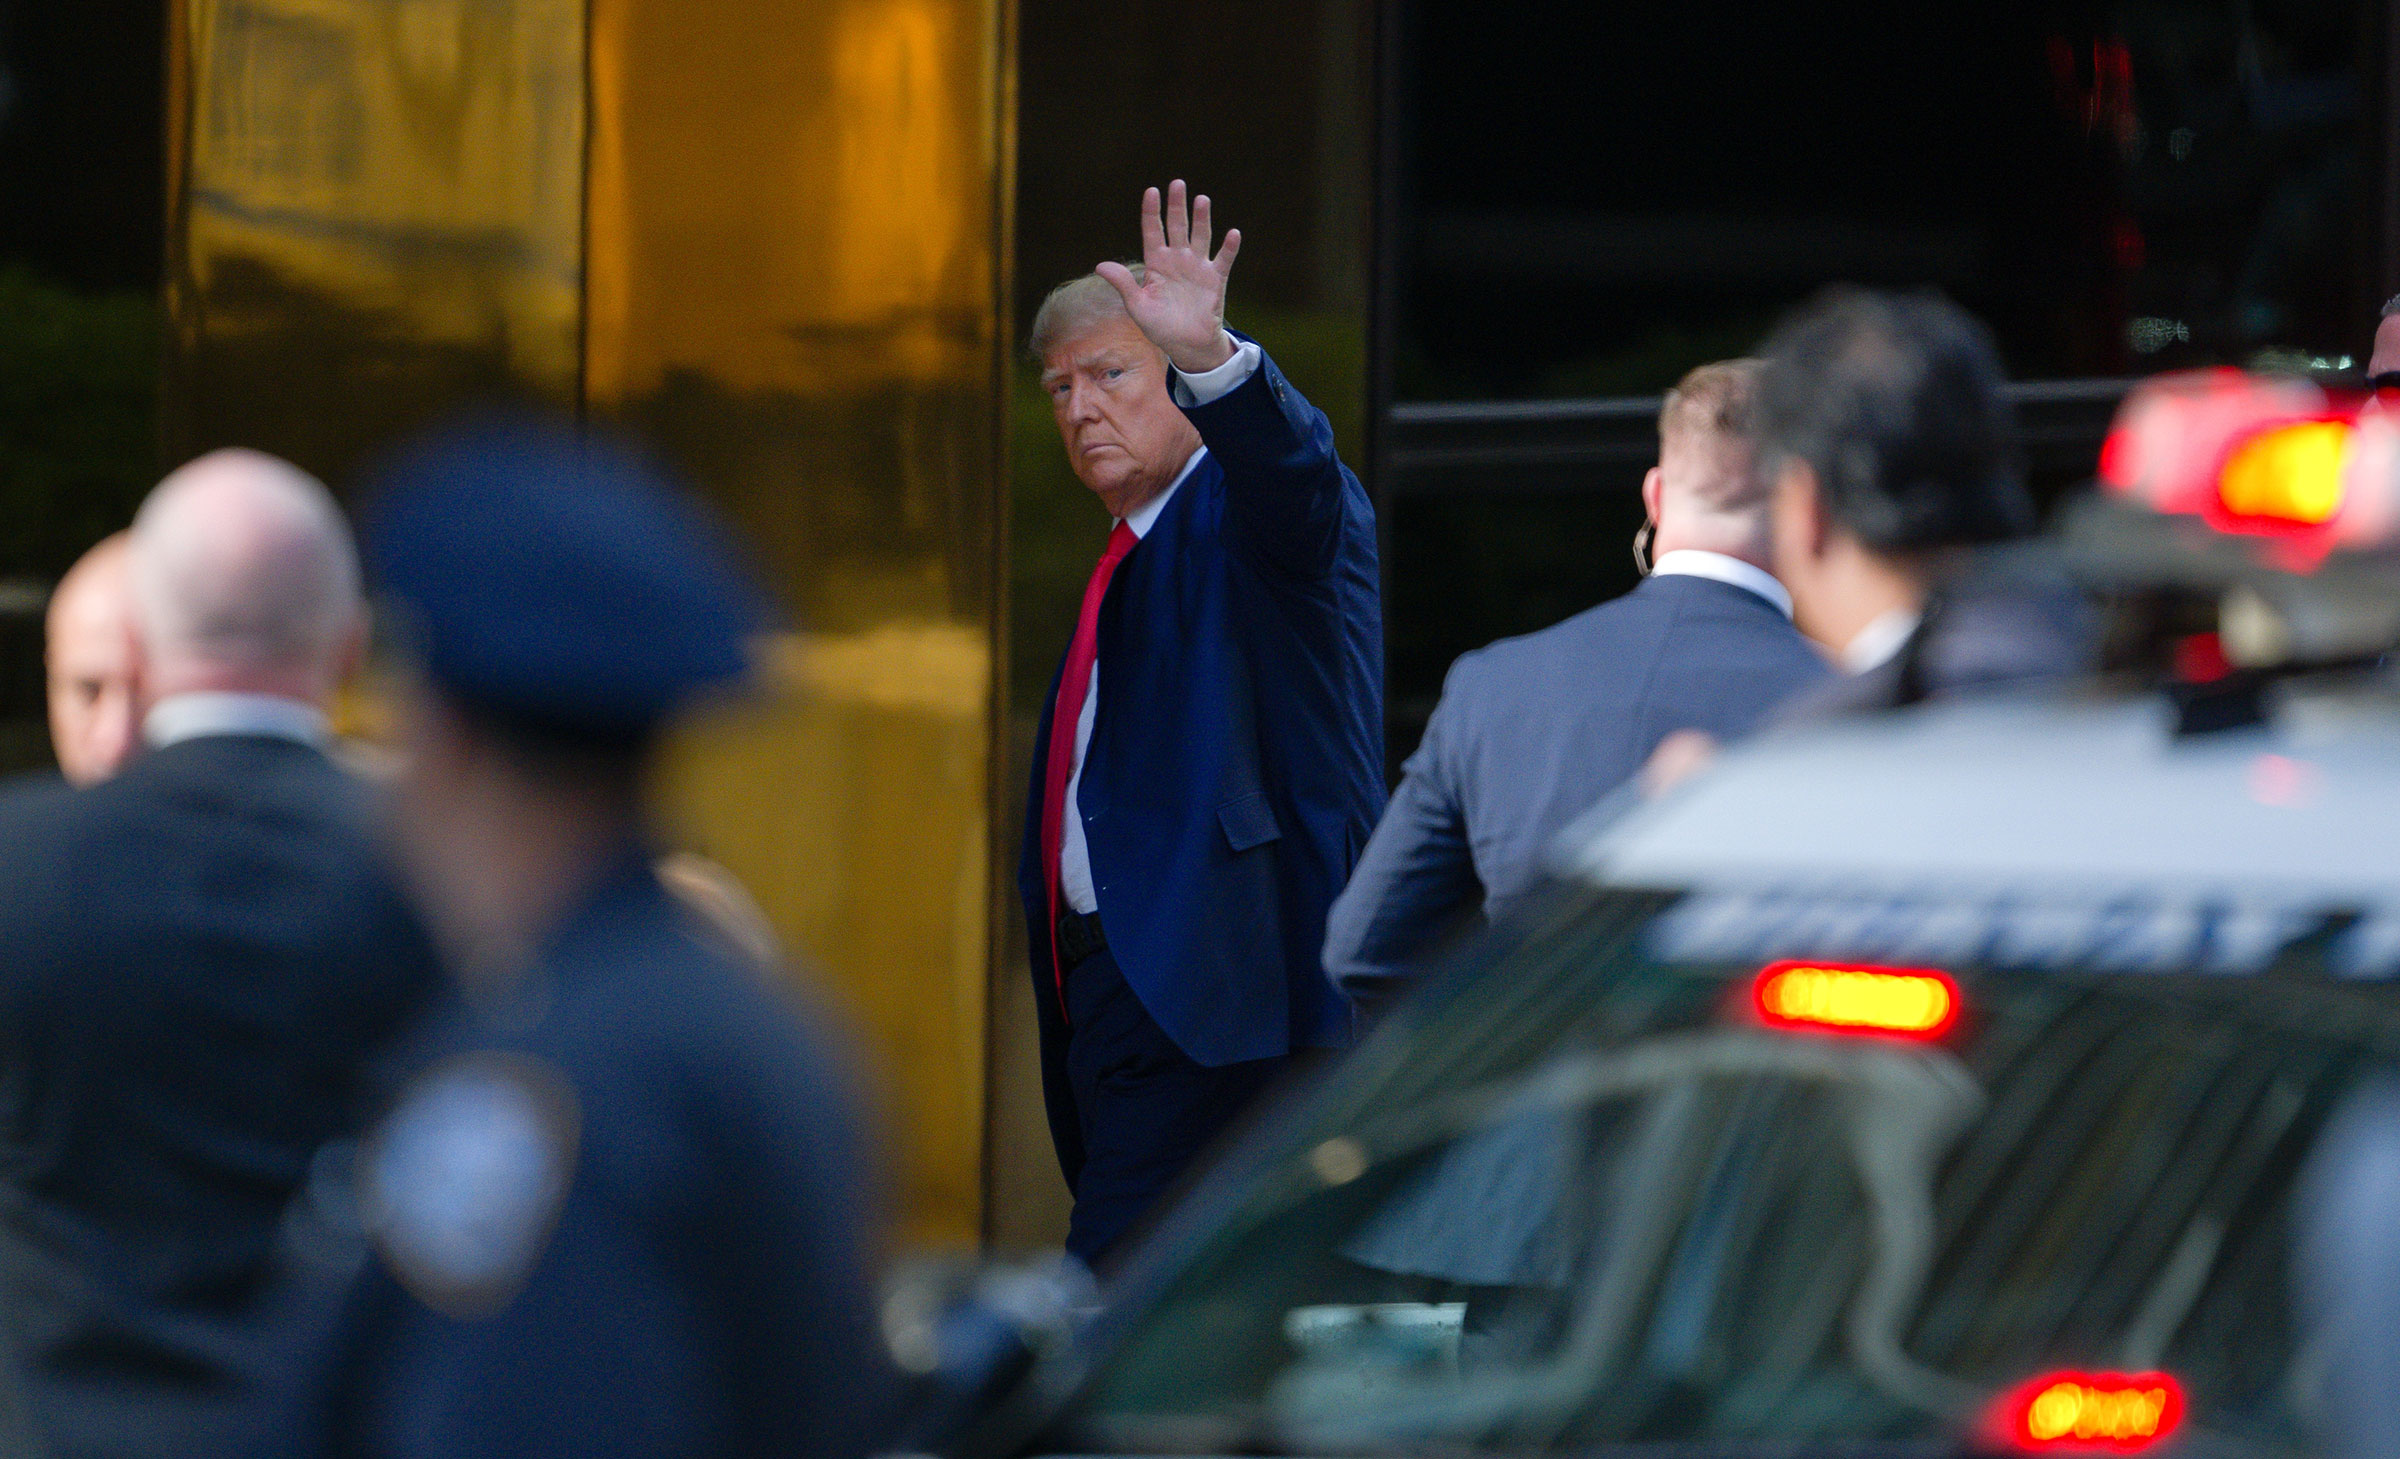 Former President Donald Trump arrives at Trump Tower in Manhattan on April 3, 2023. (James Devaney—GC Images/Getty Images)